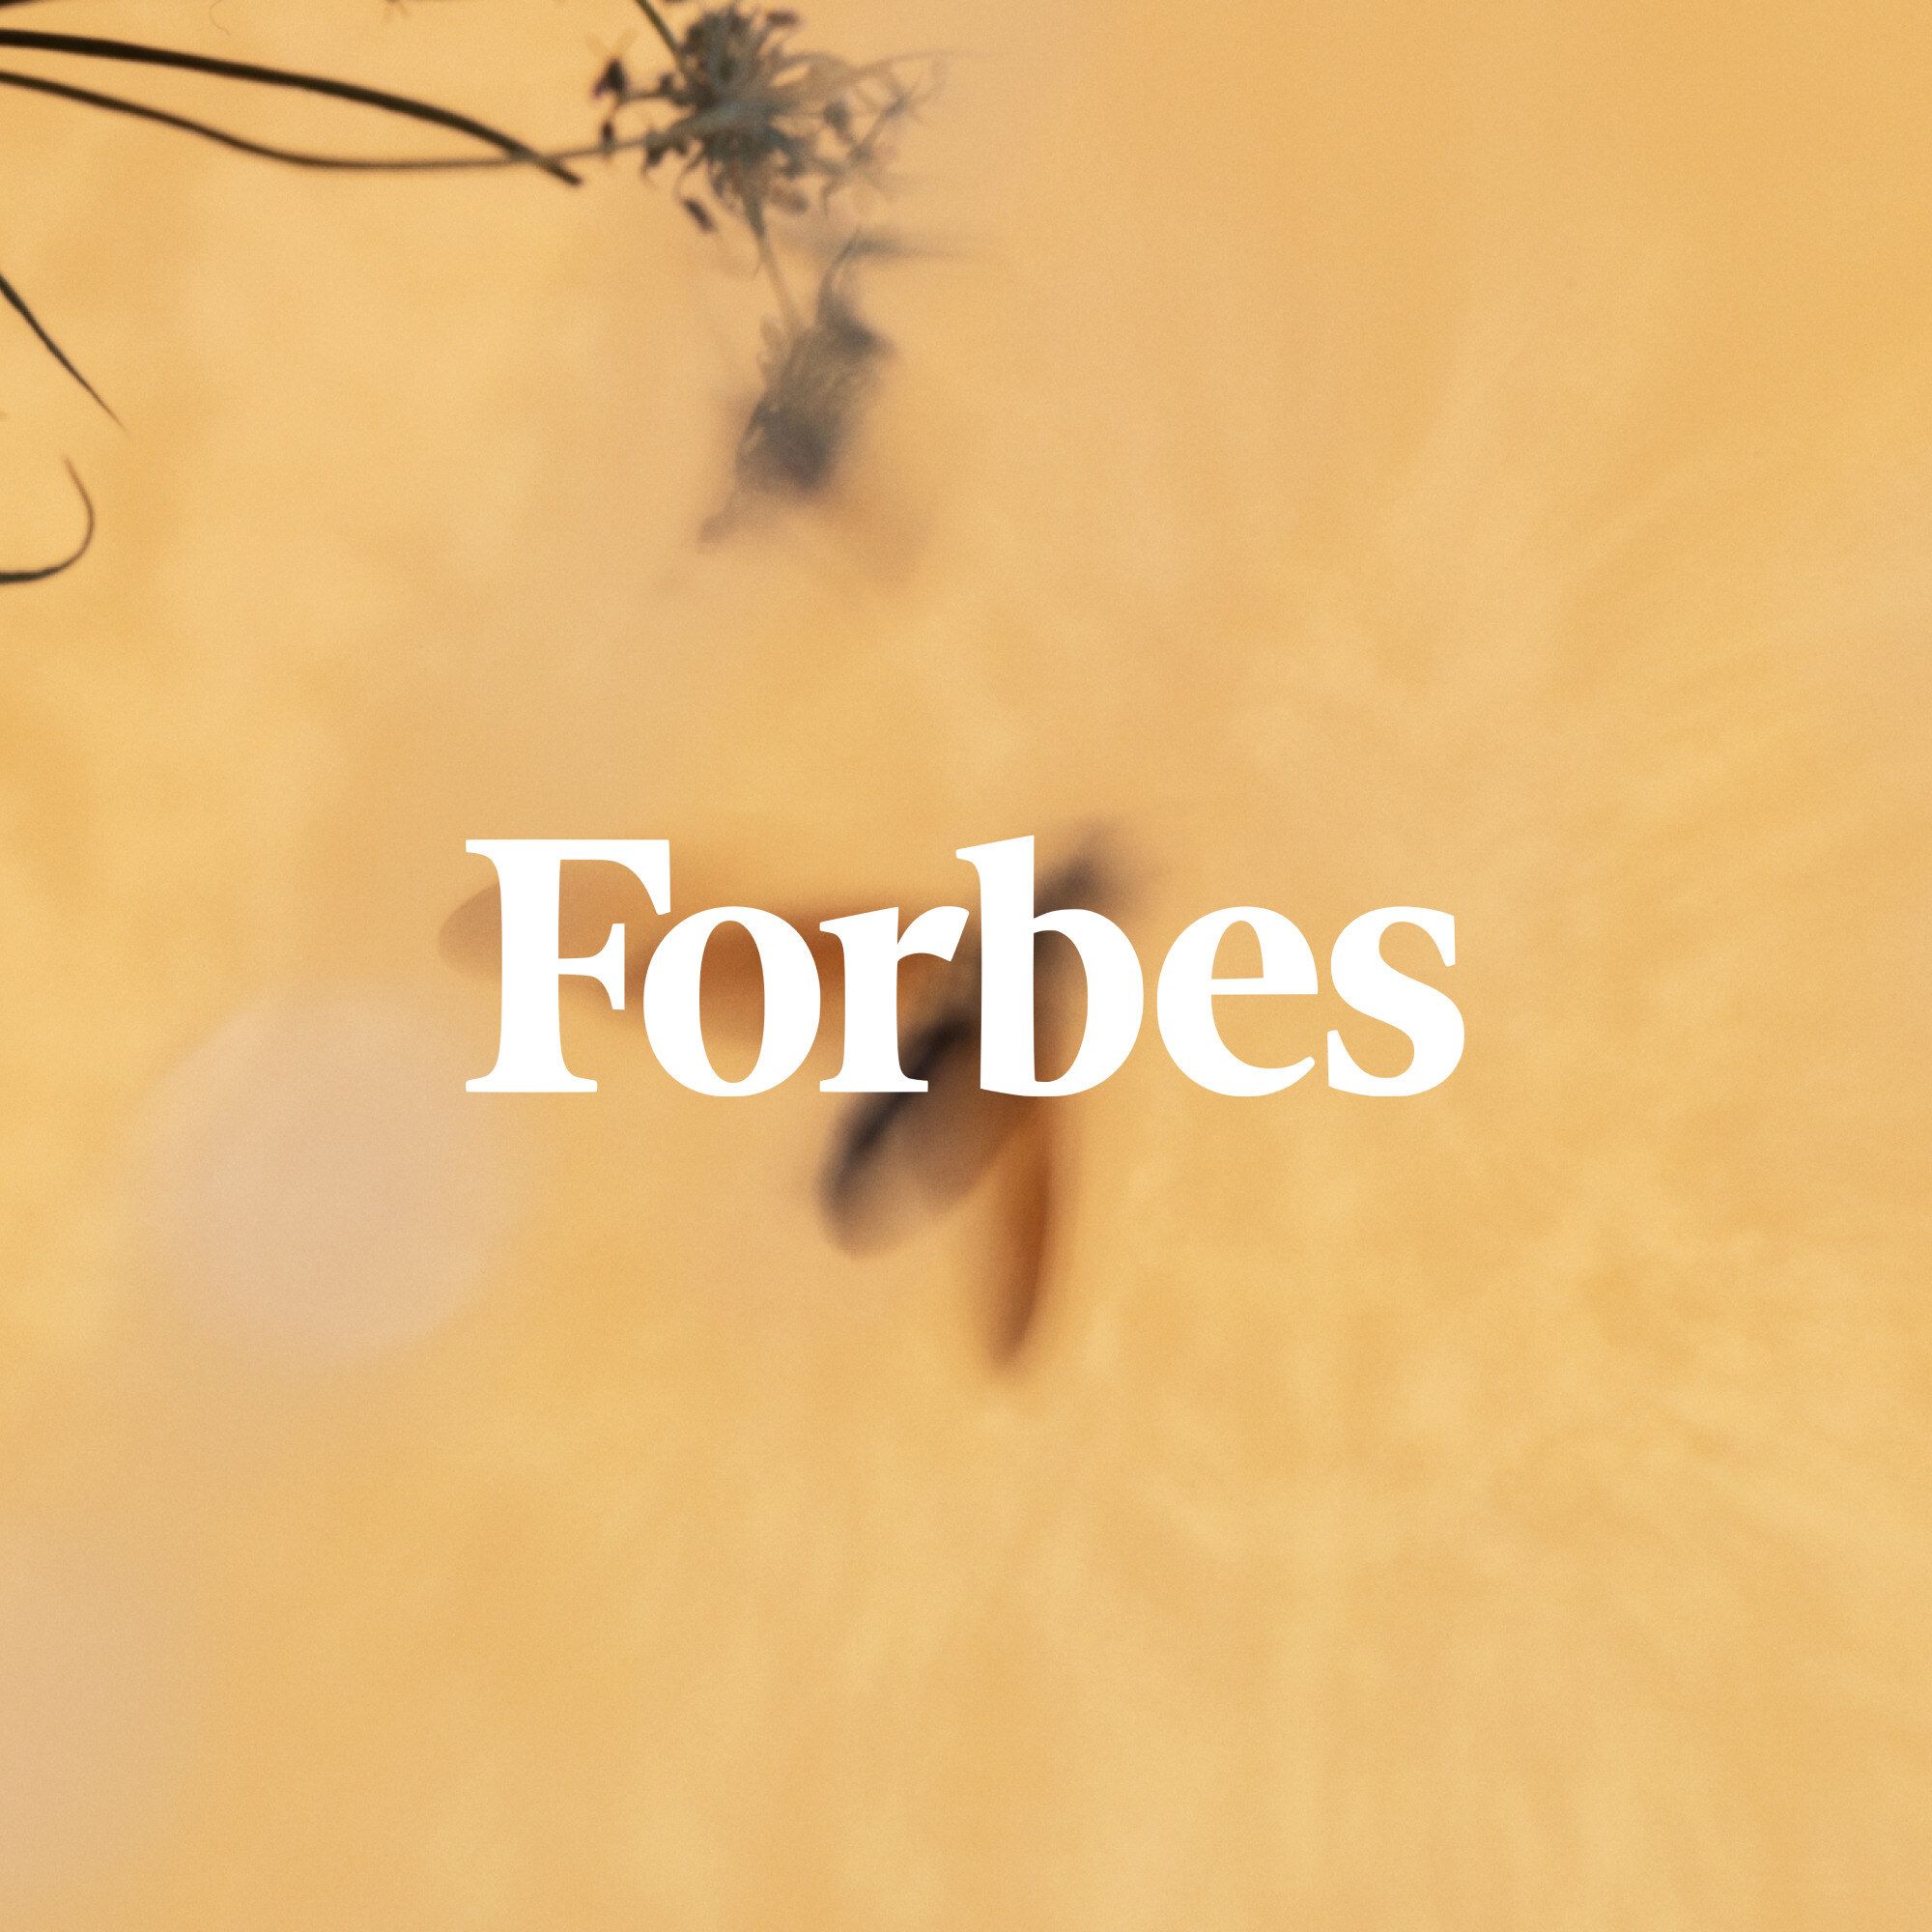 Forbes logo on top of an image of a fly